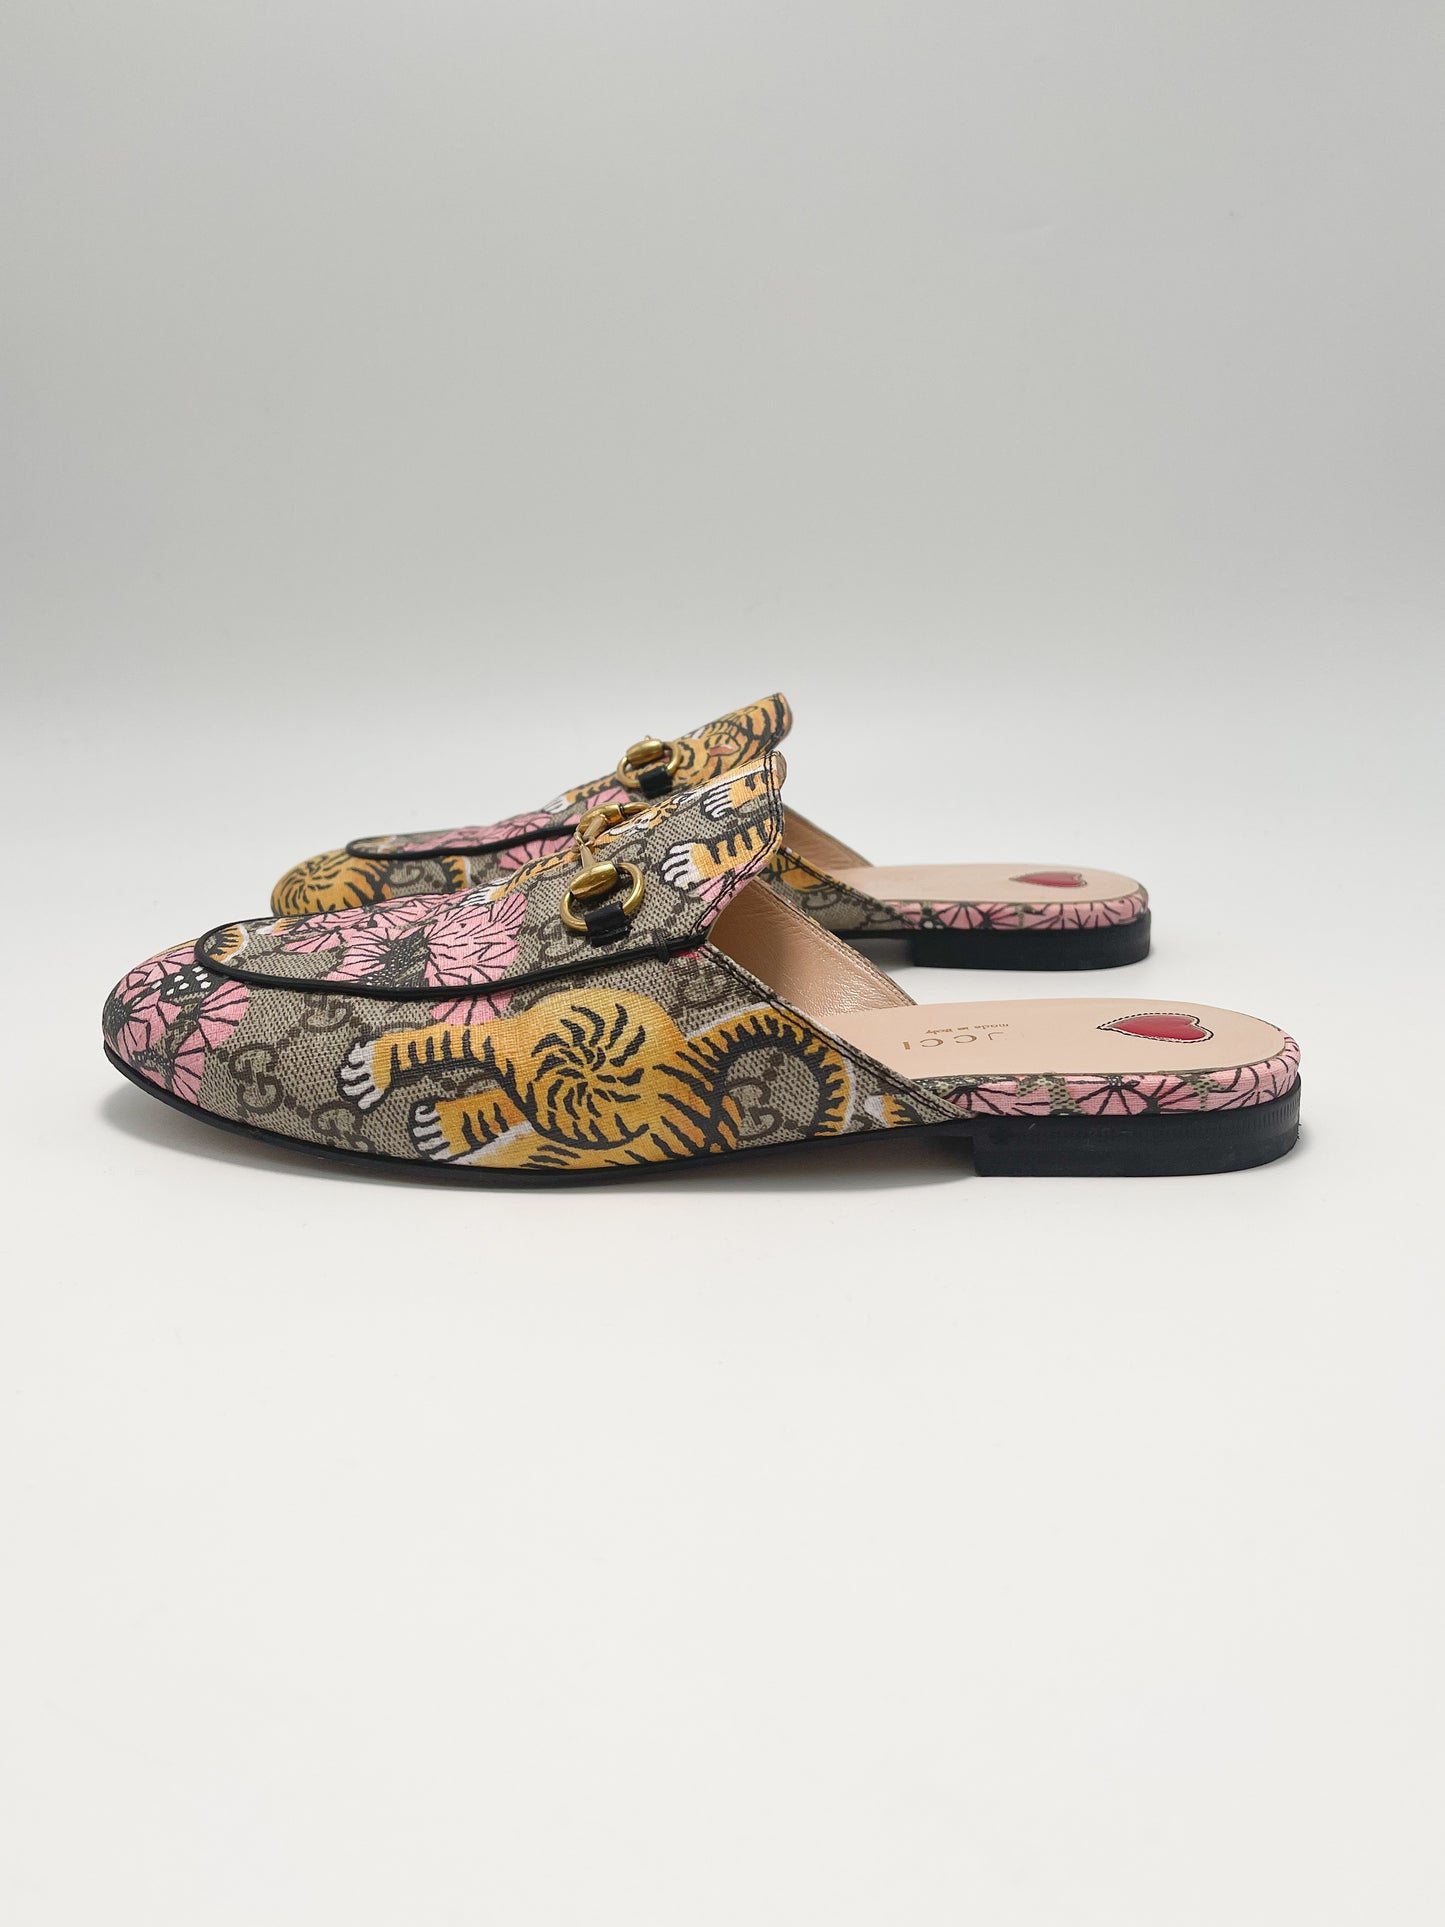 Gucci Multicolour Coated Canvas Princetown Tiger Mules (Size 39)